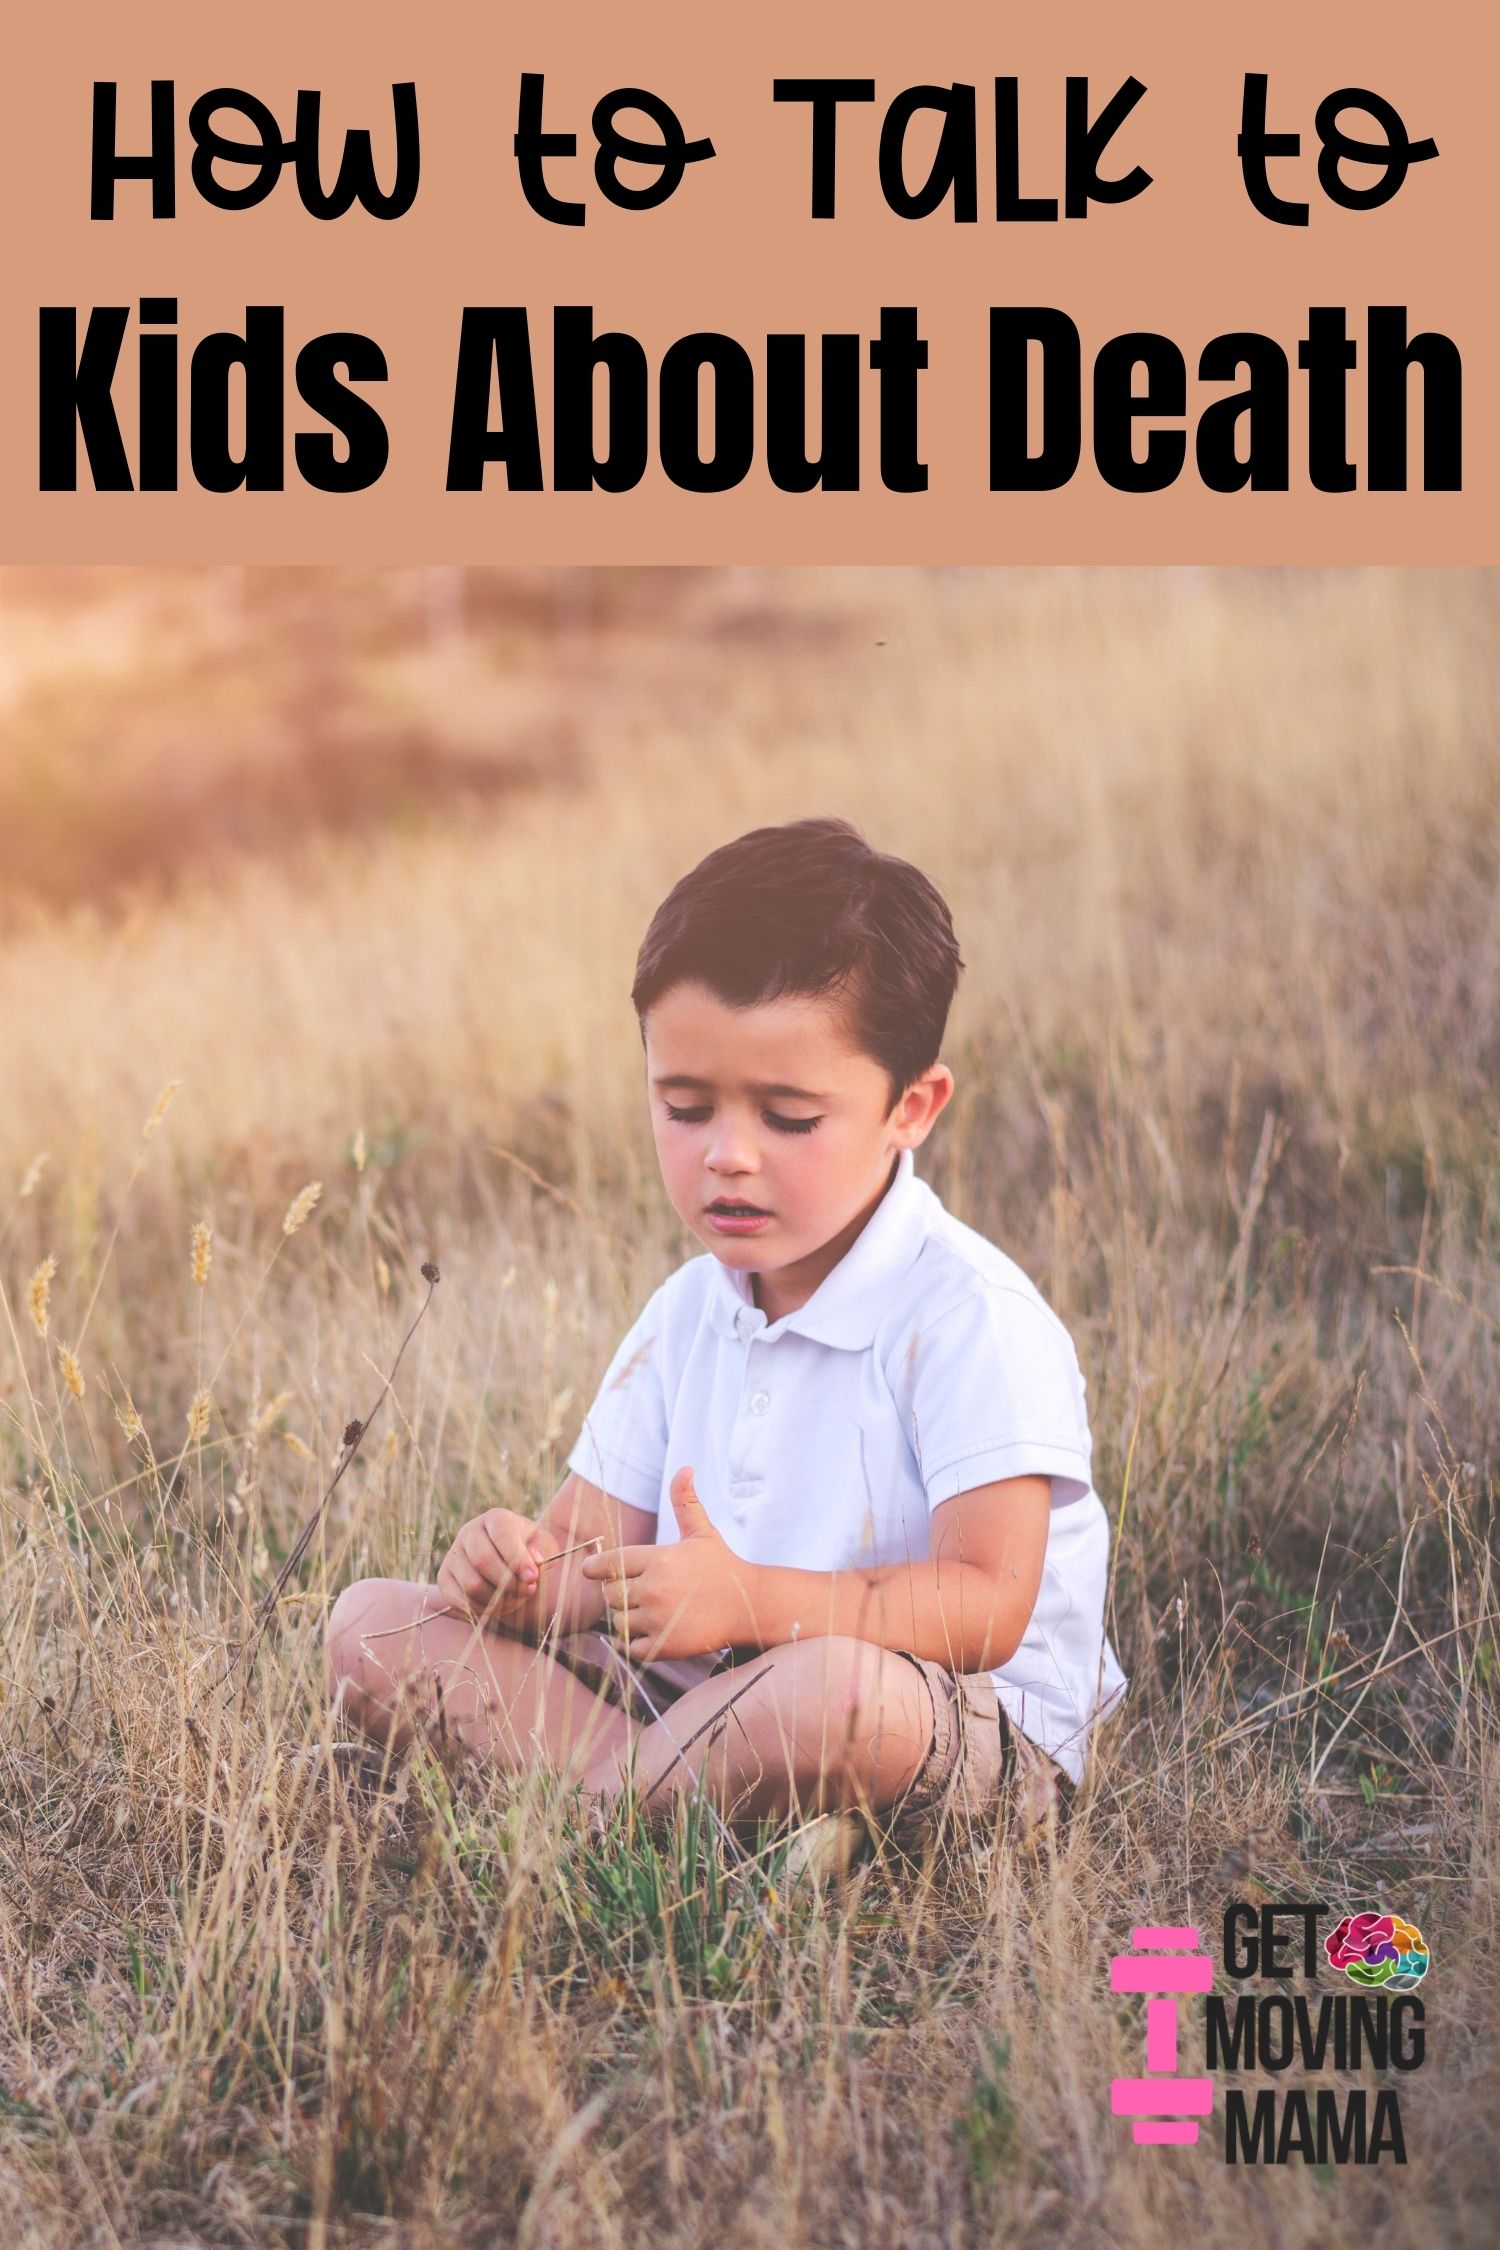 A picture of a boy sitting alone in a field with "how to talk to kids about death" in black text.